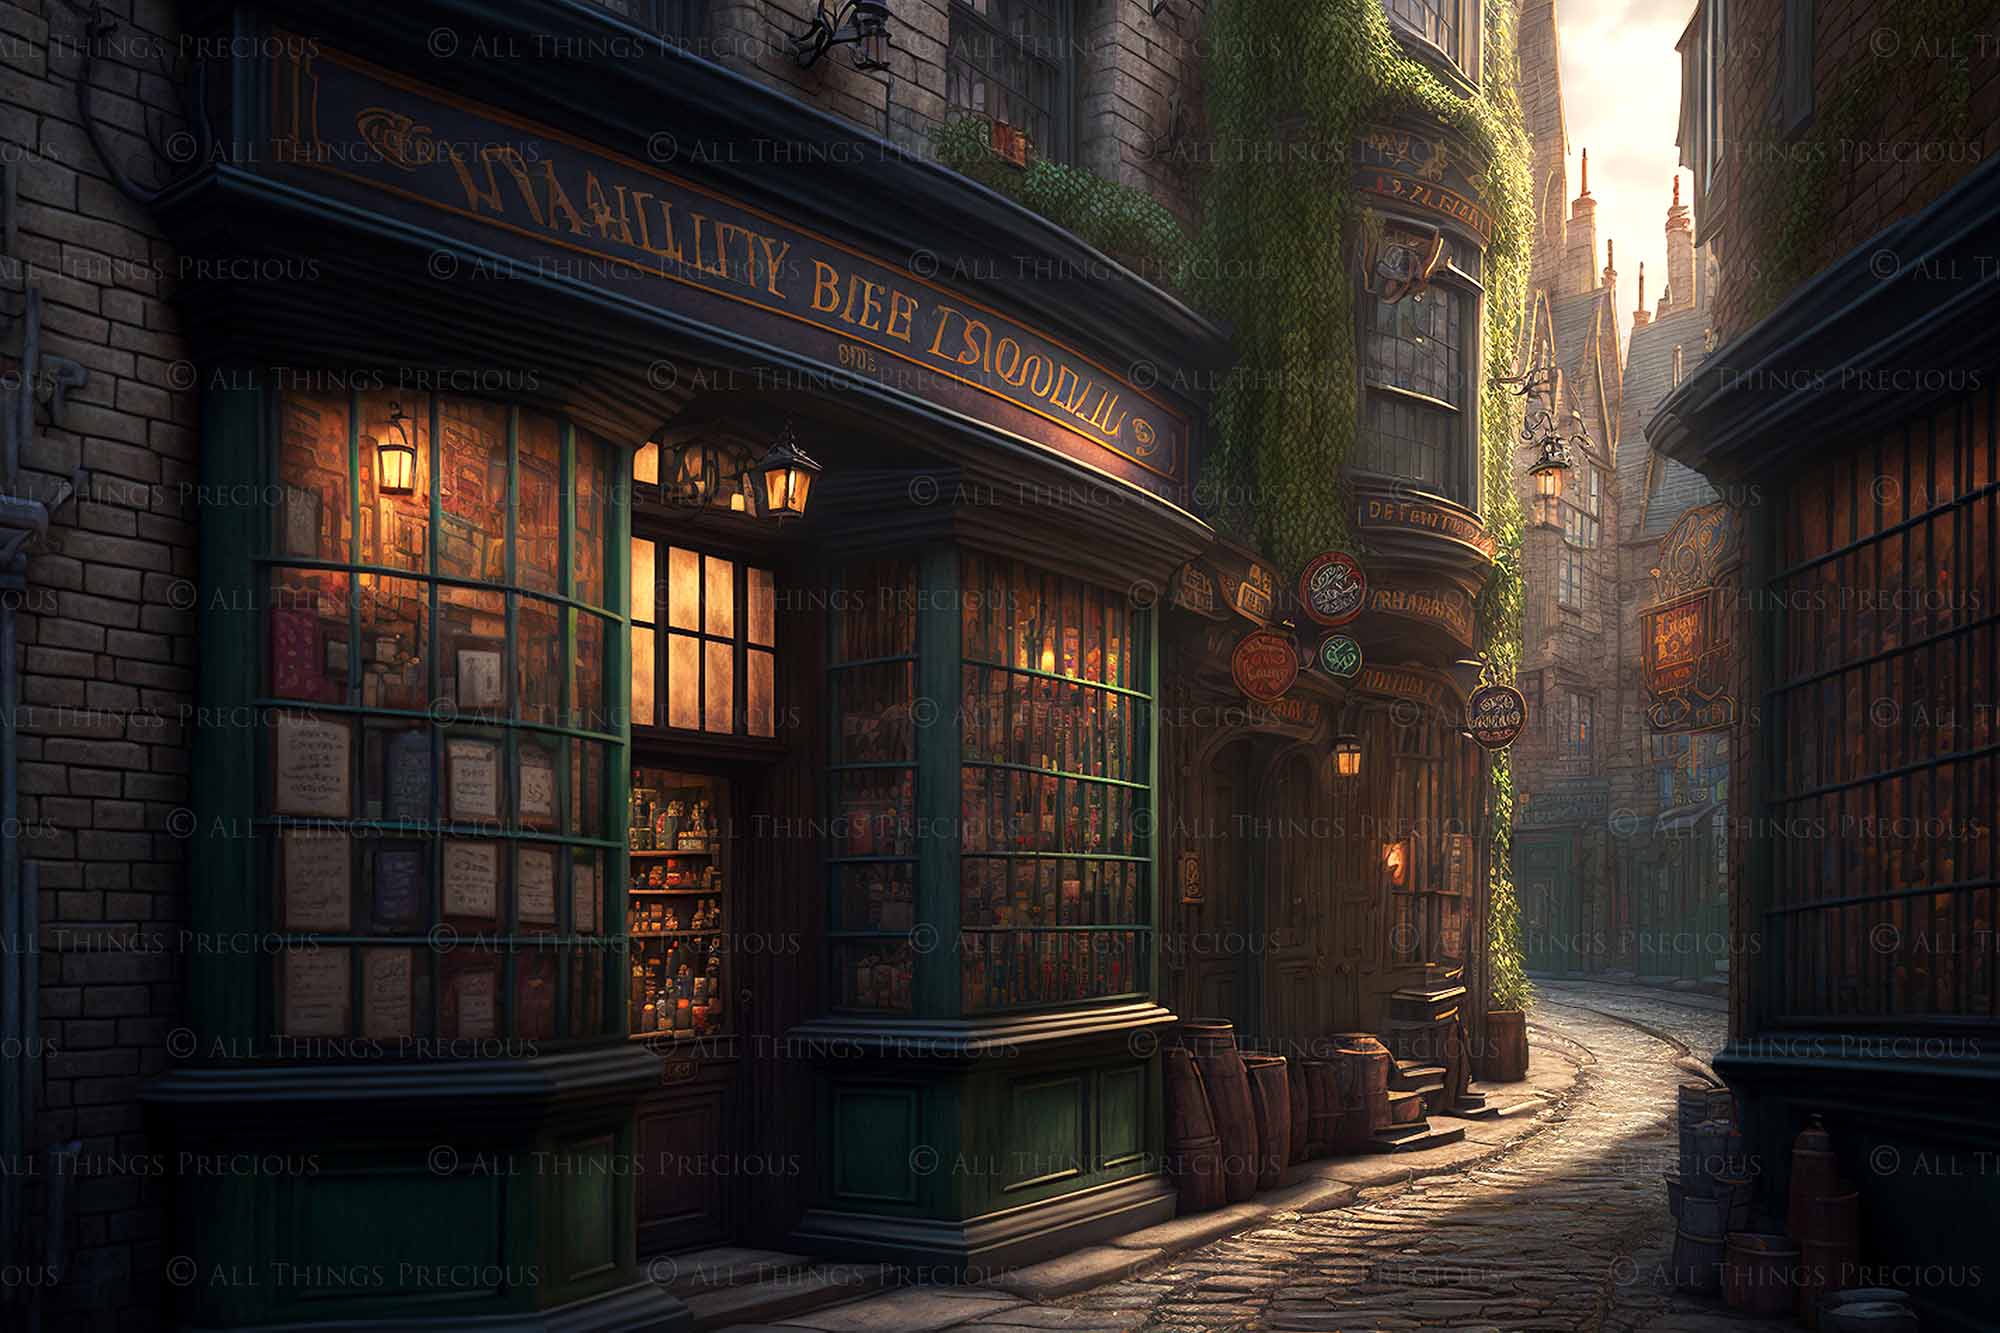 Wizard Diagon Alley digital background. High resolution harry potter themed digital backdrops made in AI. With old english shops, cobbled streets and magical lighting, these would make beautiful backdrops.